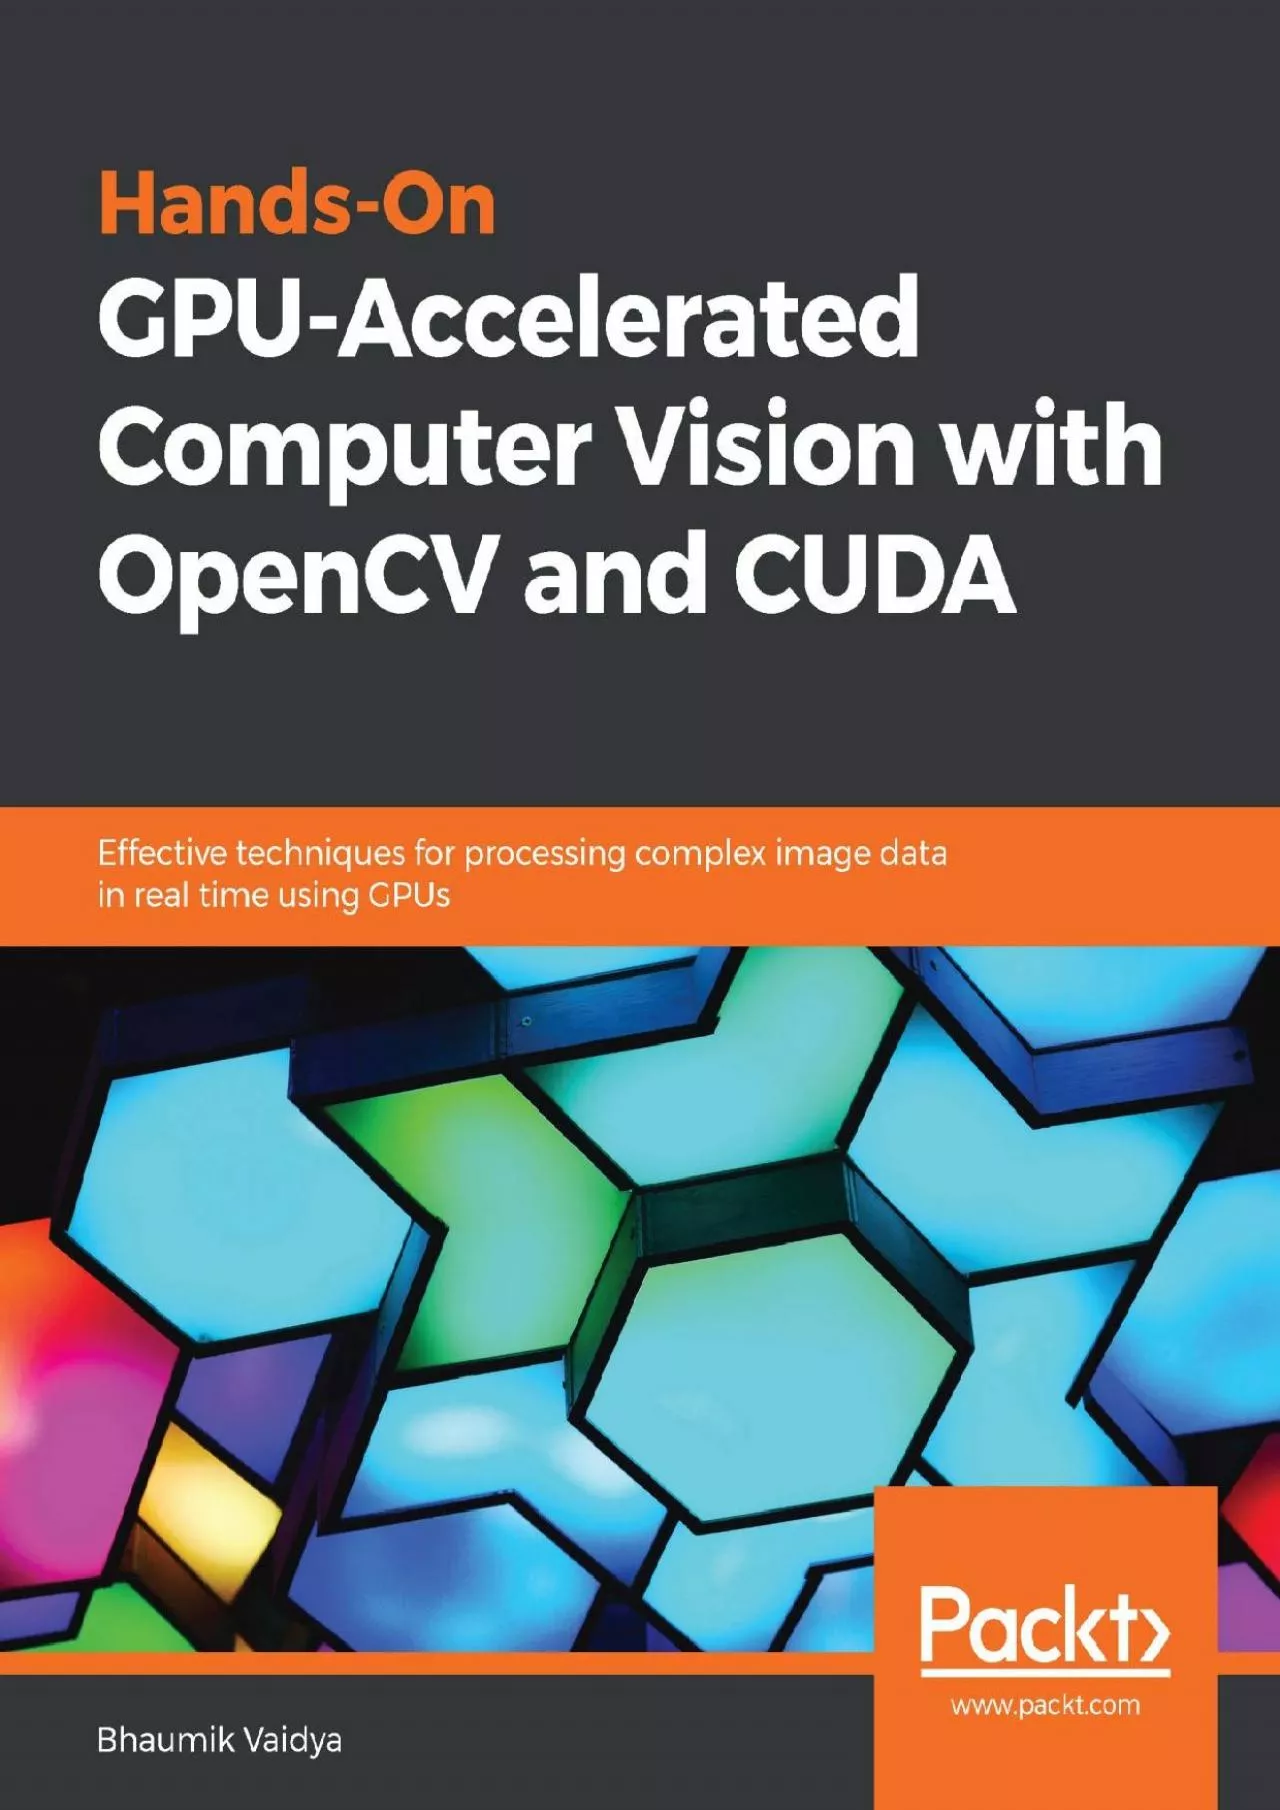 [PDF]-Hands-On GPU-Accelerated Computer Vision with OpenCV and CUDA: Effective techniques